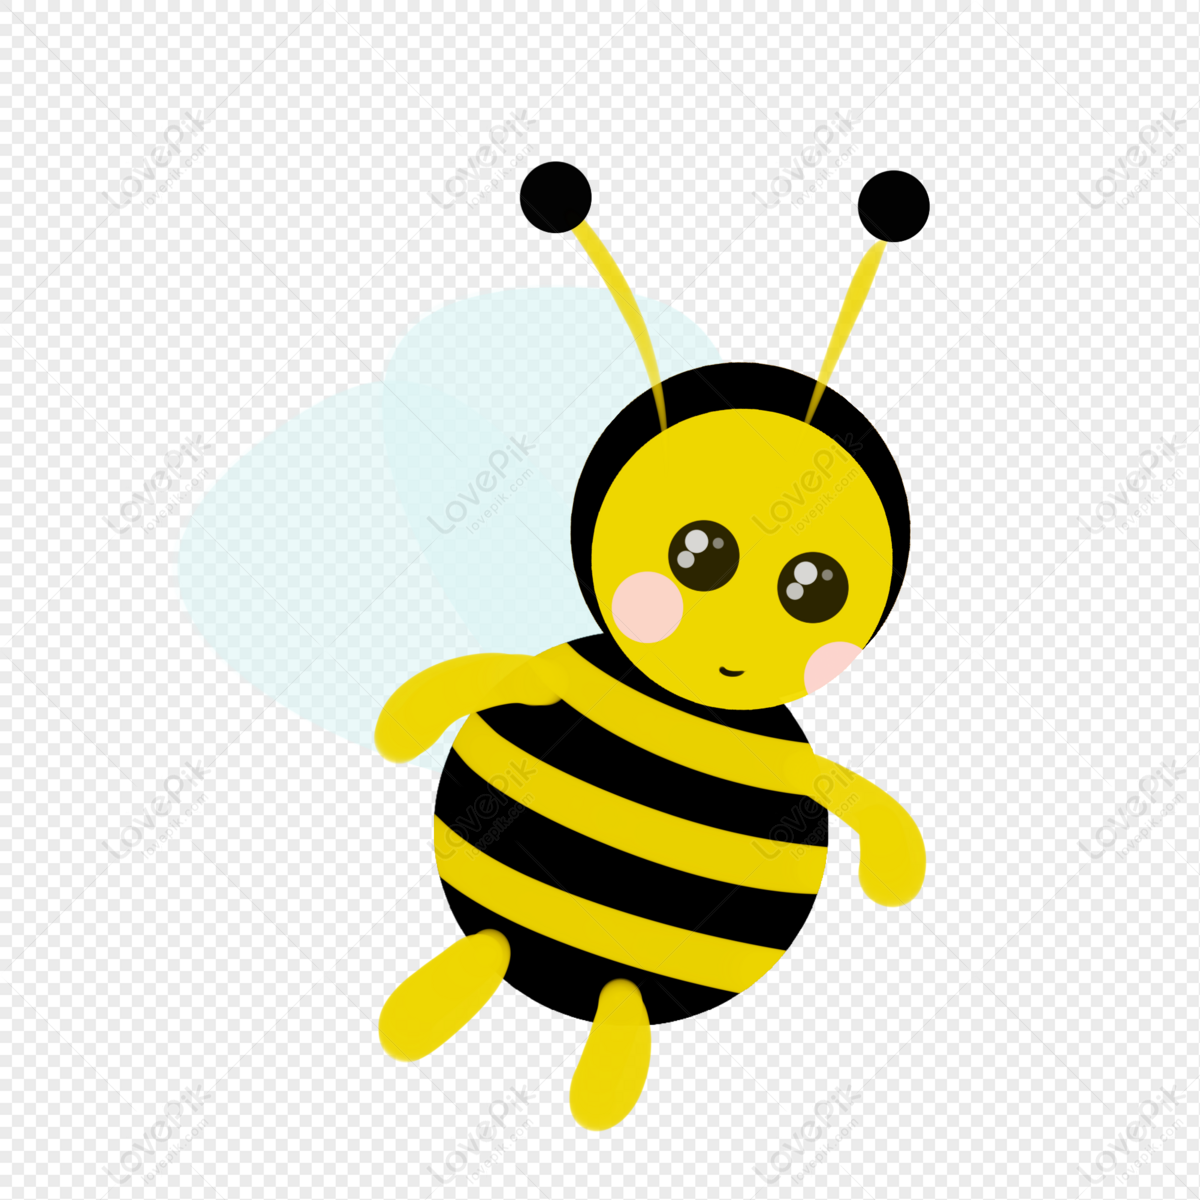 Bee Free PNG And Clipart Image For Free Download - Lovepik | 401278169